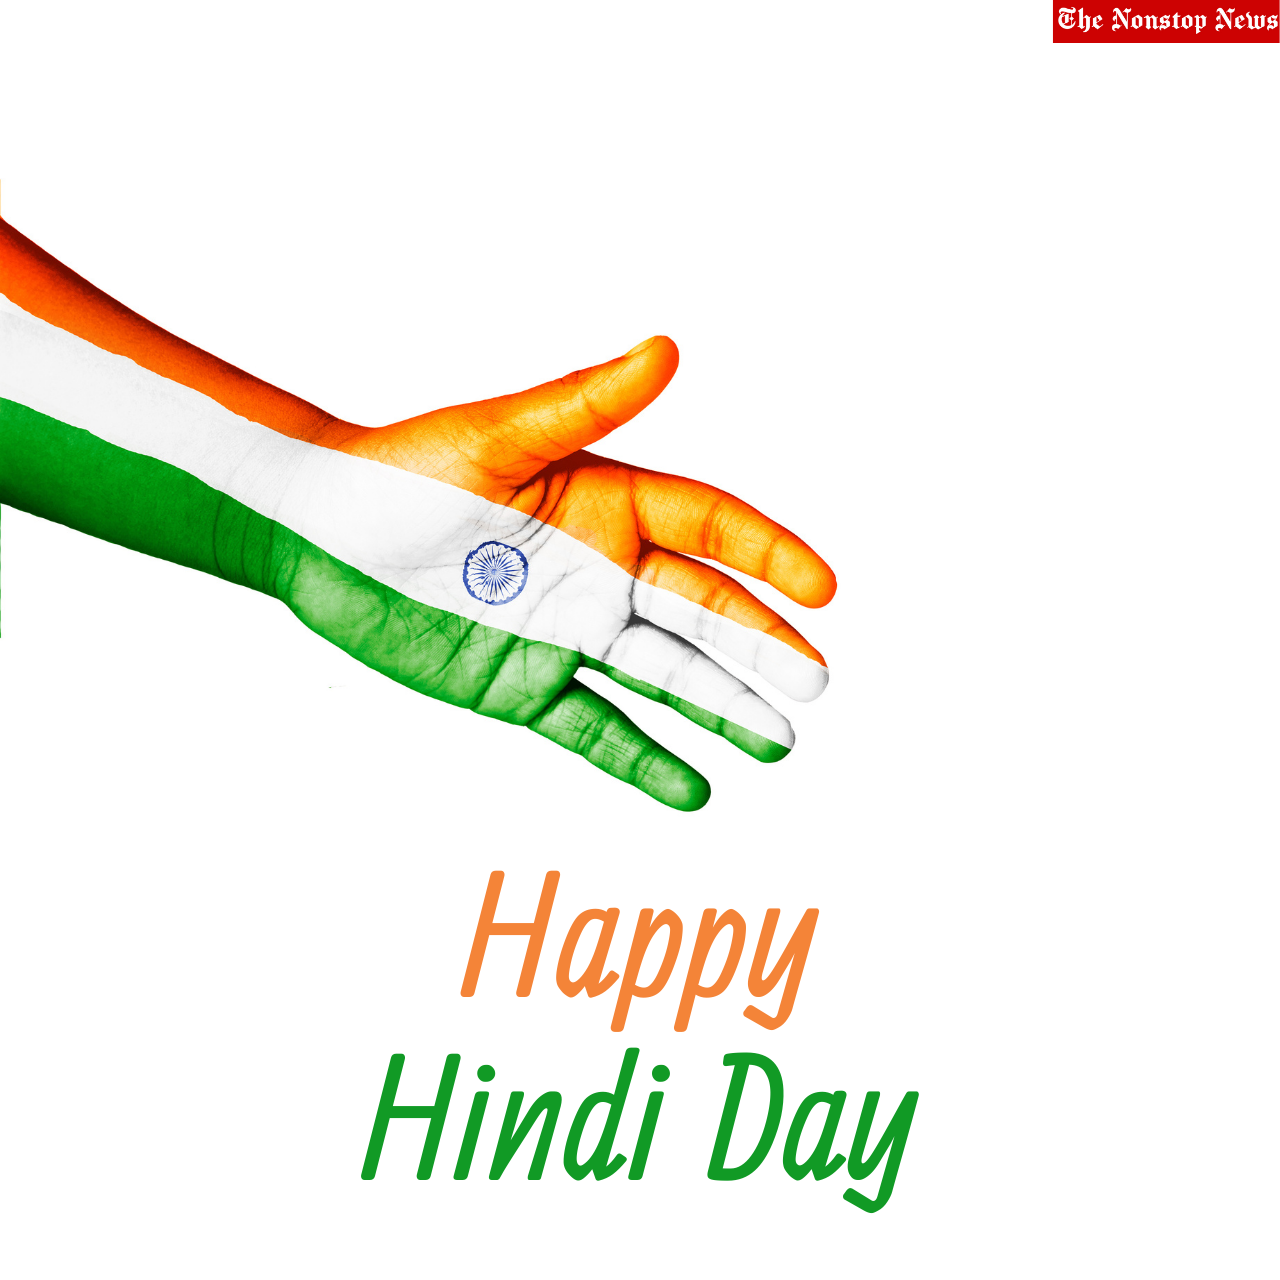 Happy Hindi Day 2022 WhatsApp Status Video Download to greet your loved ones